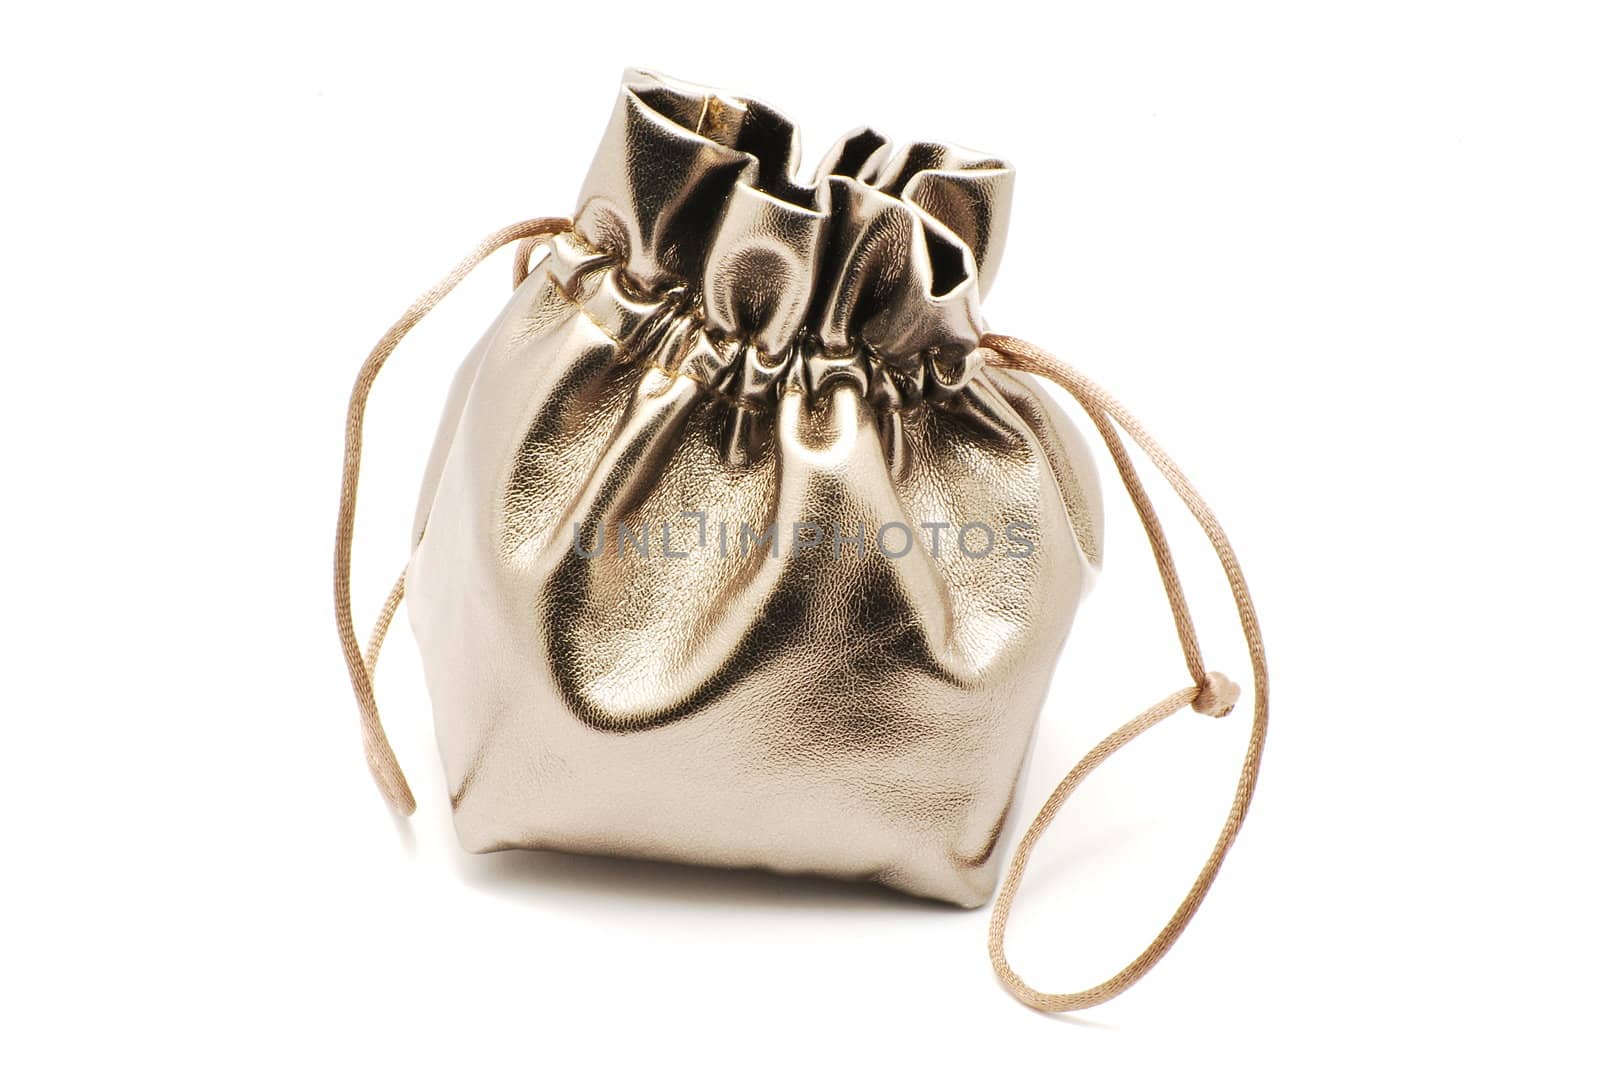 Small jewelry bag by photoefect